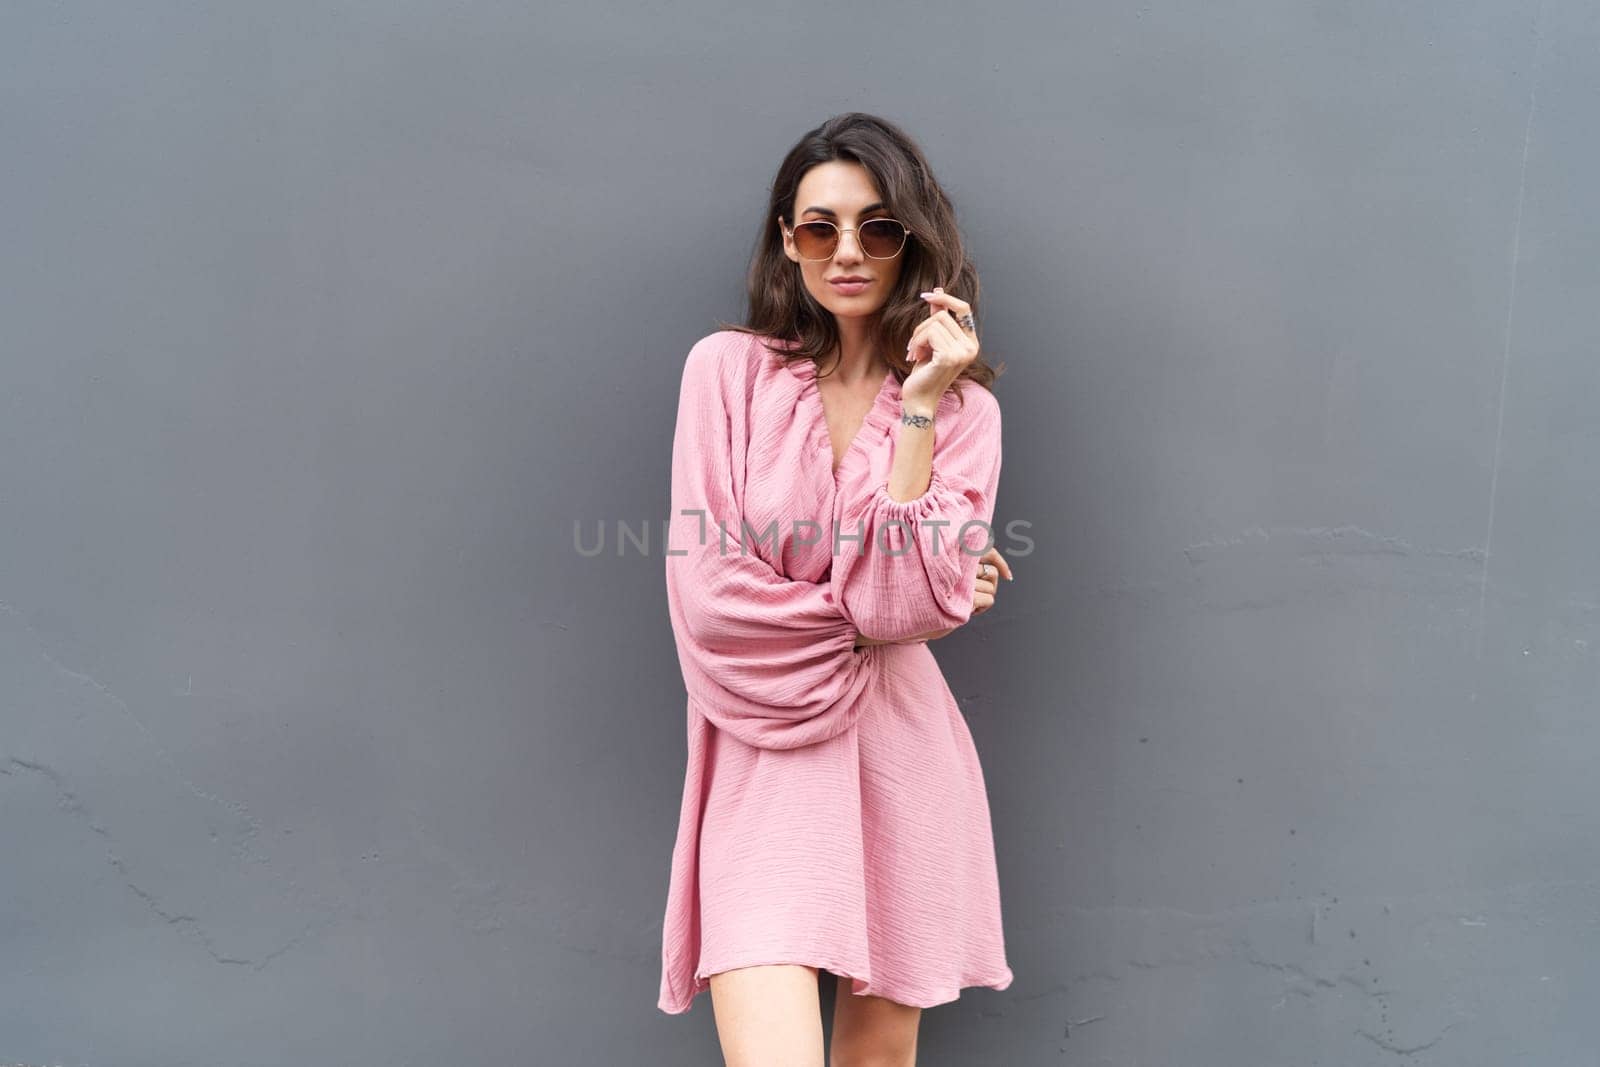 Young beautiful smiling cute romantic woman in trendy summer dress. Carefree woman posing in the street near grey wall. Positive model outdoors in sunglasses. Cheerful and happy.